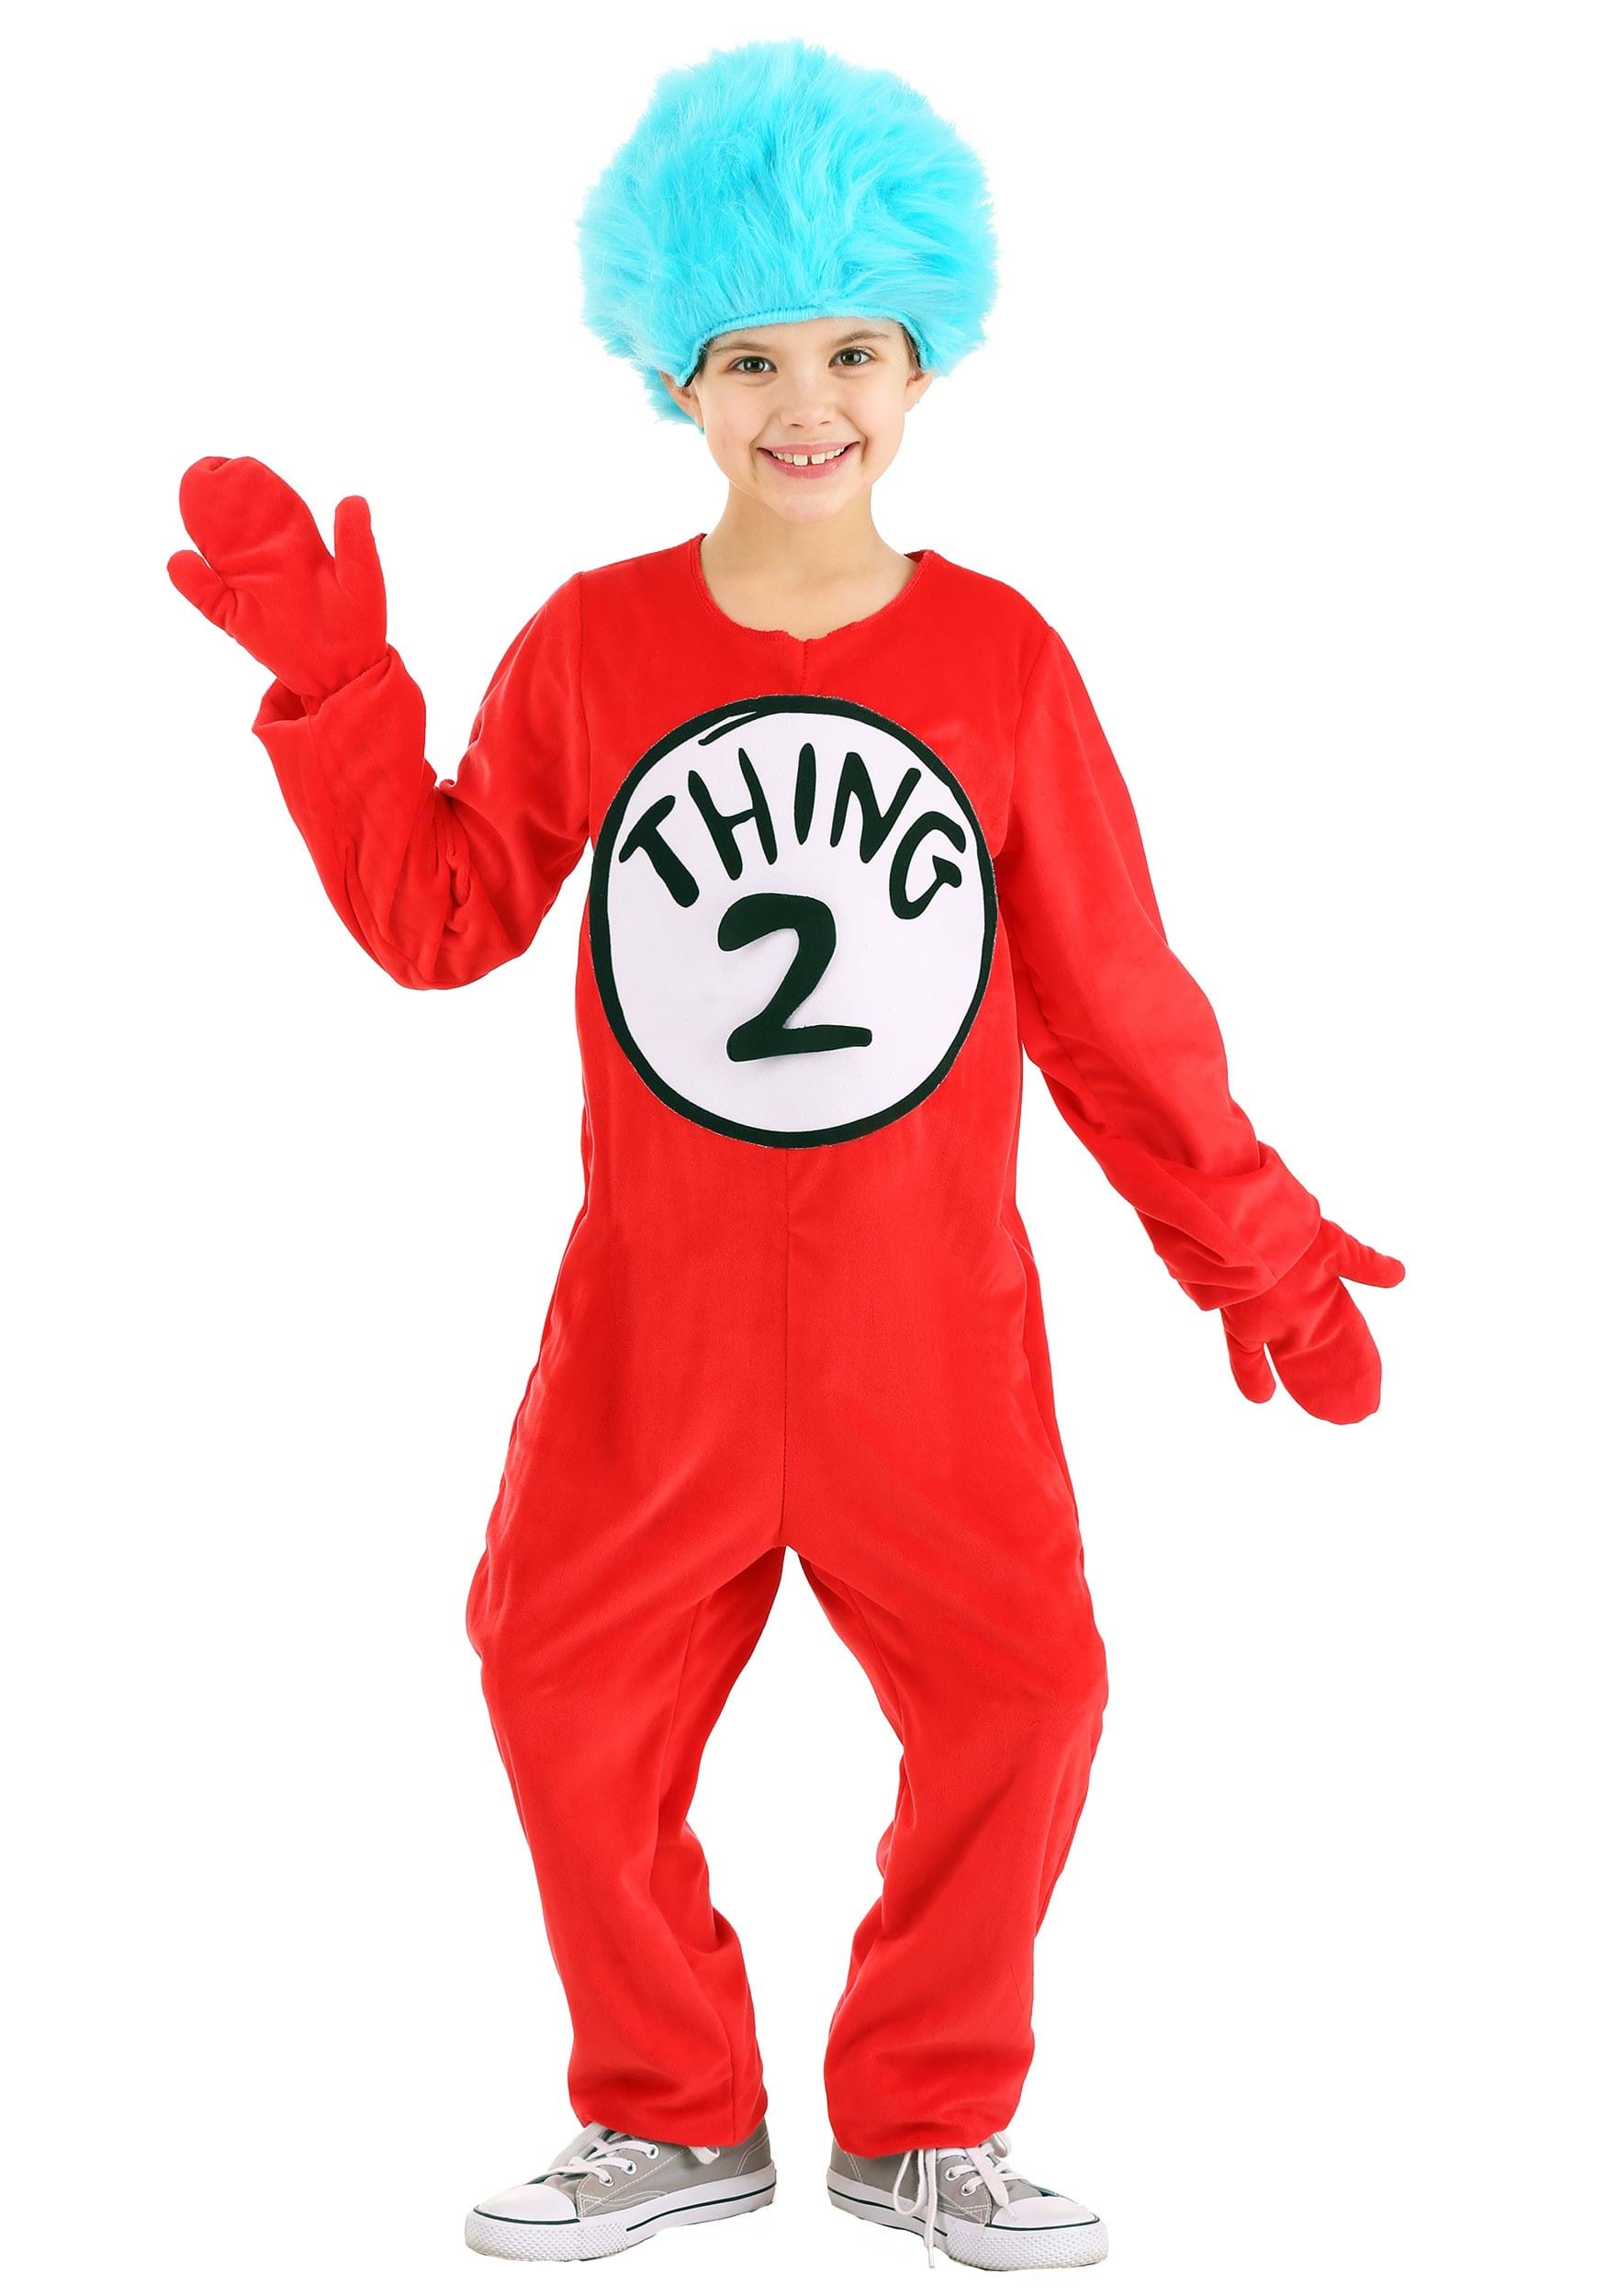 Thing 1&2 Deluxe Kids Costume